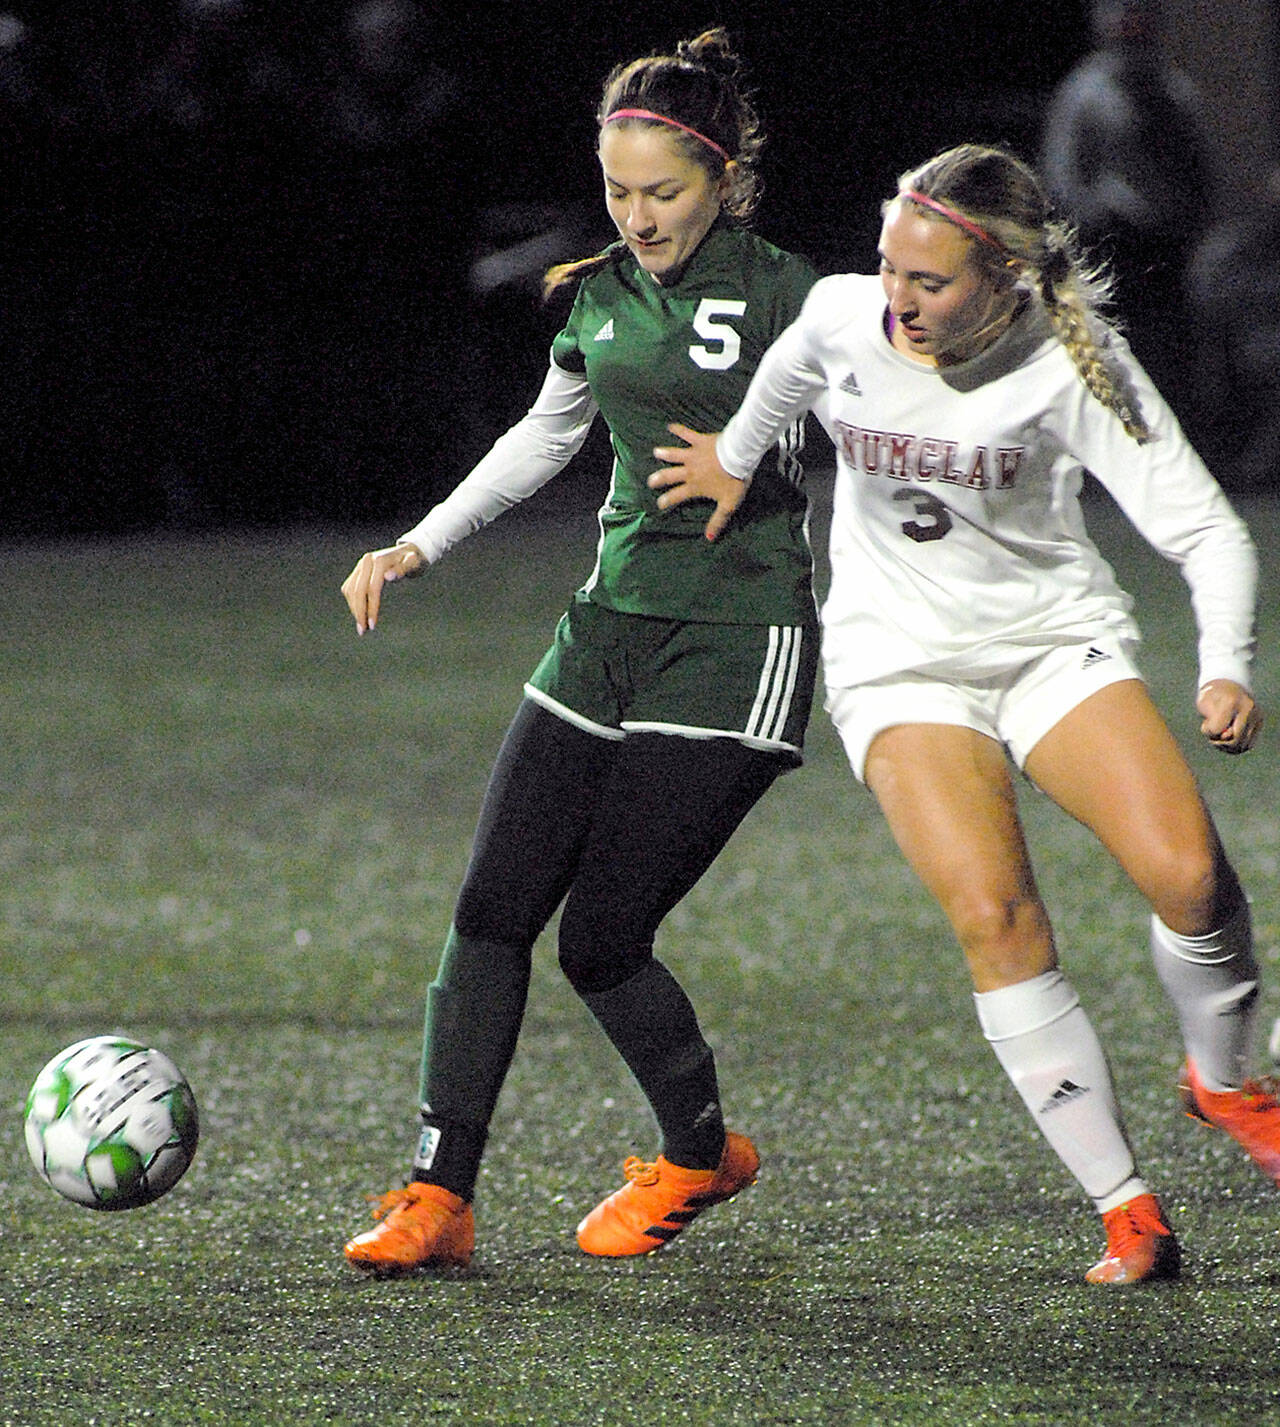 Port Angeles’ Mia Gagnon, left, and Enumclaw’s Lauren Boger battle for the ball during Tuesday night’s playoff game at Wally Sigmar Field in Port Angeles. (Keith Thorpe/Peninsula Daily News)